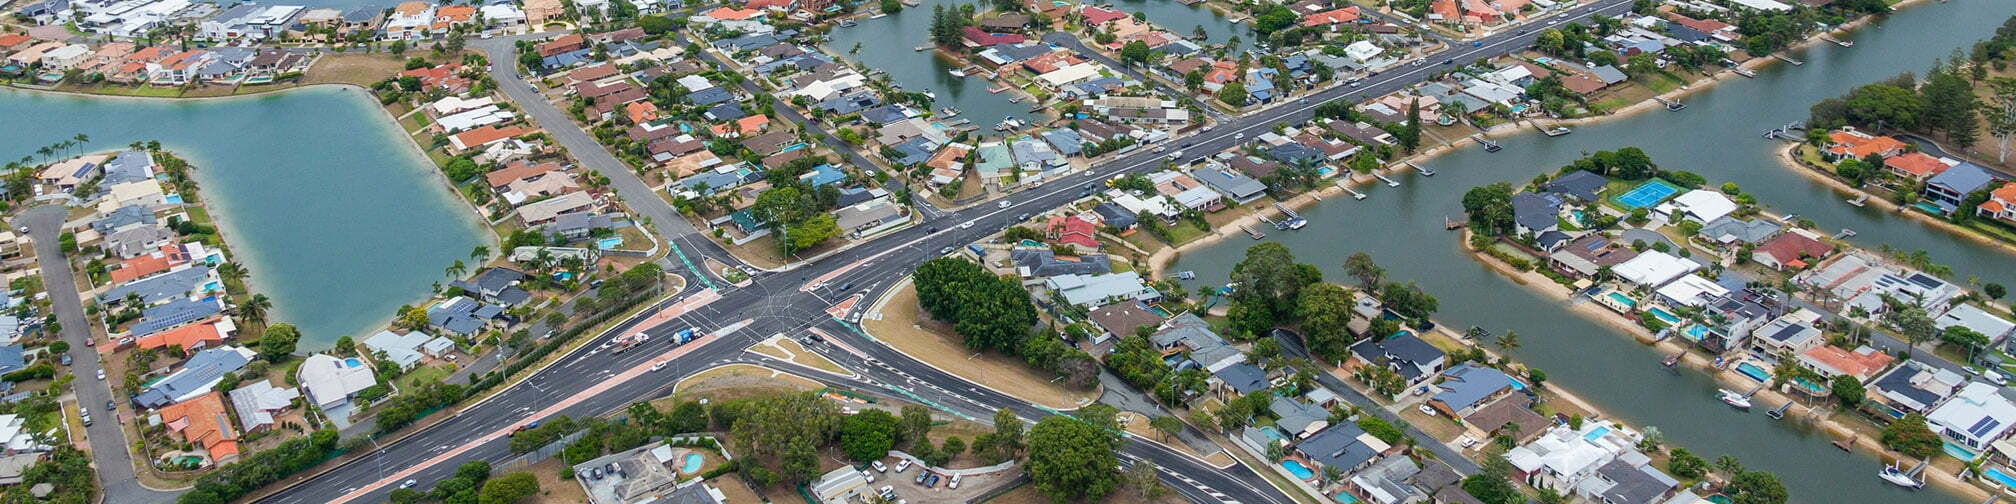 Image for SOUTHPORT-BURLEIGH FLOWS INTO COMPLETION